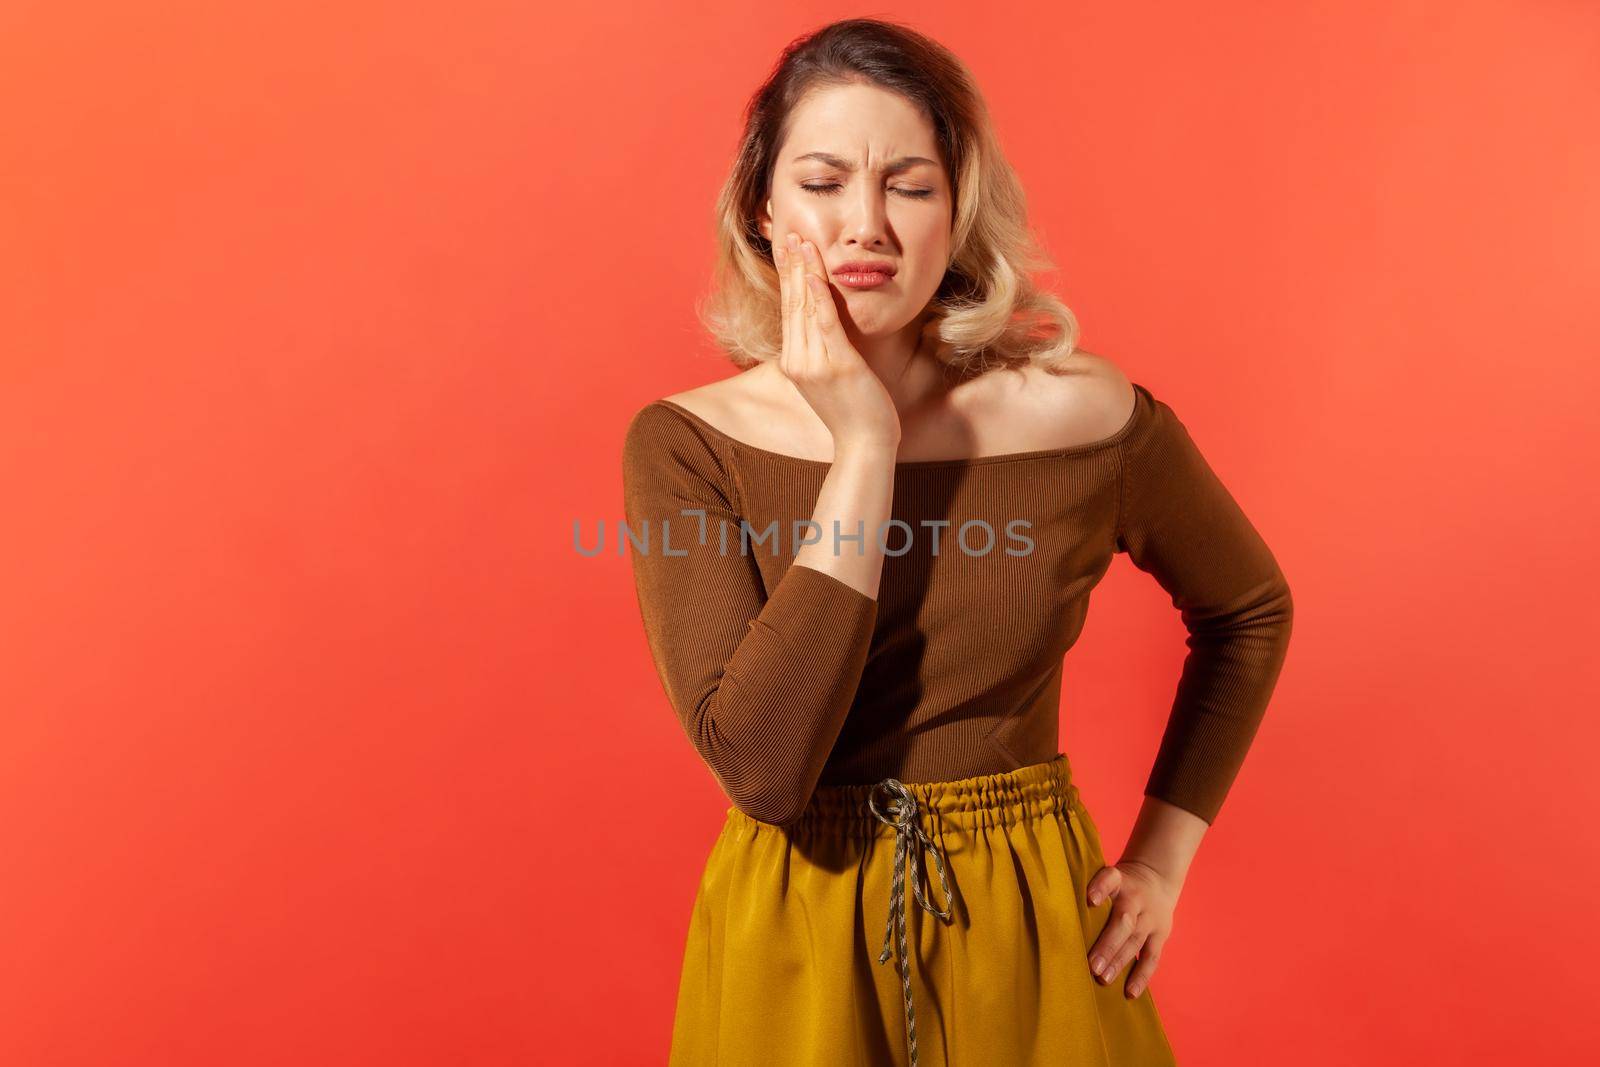 Dental problem. Unhealthy sick blonde woman touching cheek, closing eyes with expression of terrible suffer from toothache, sensitive teeth, cavities. Indoor studio shot isolated on red background